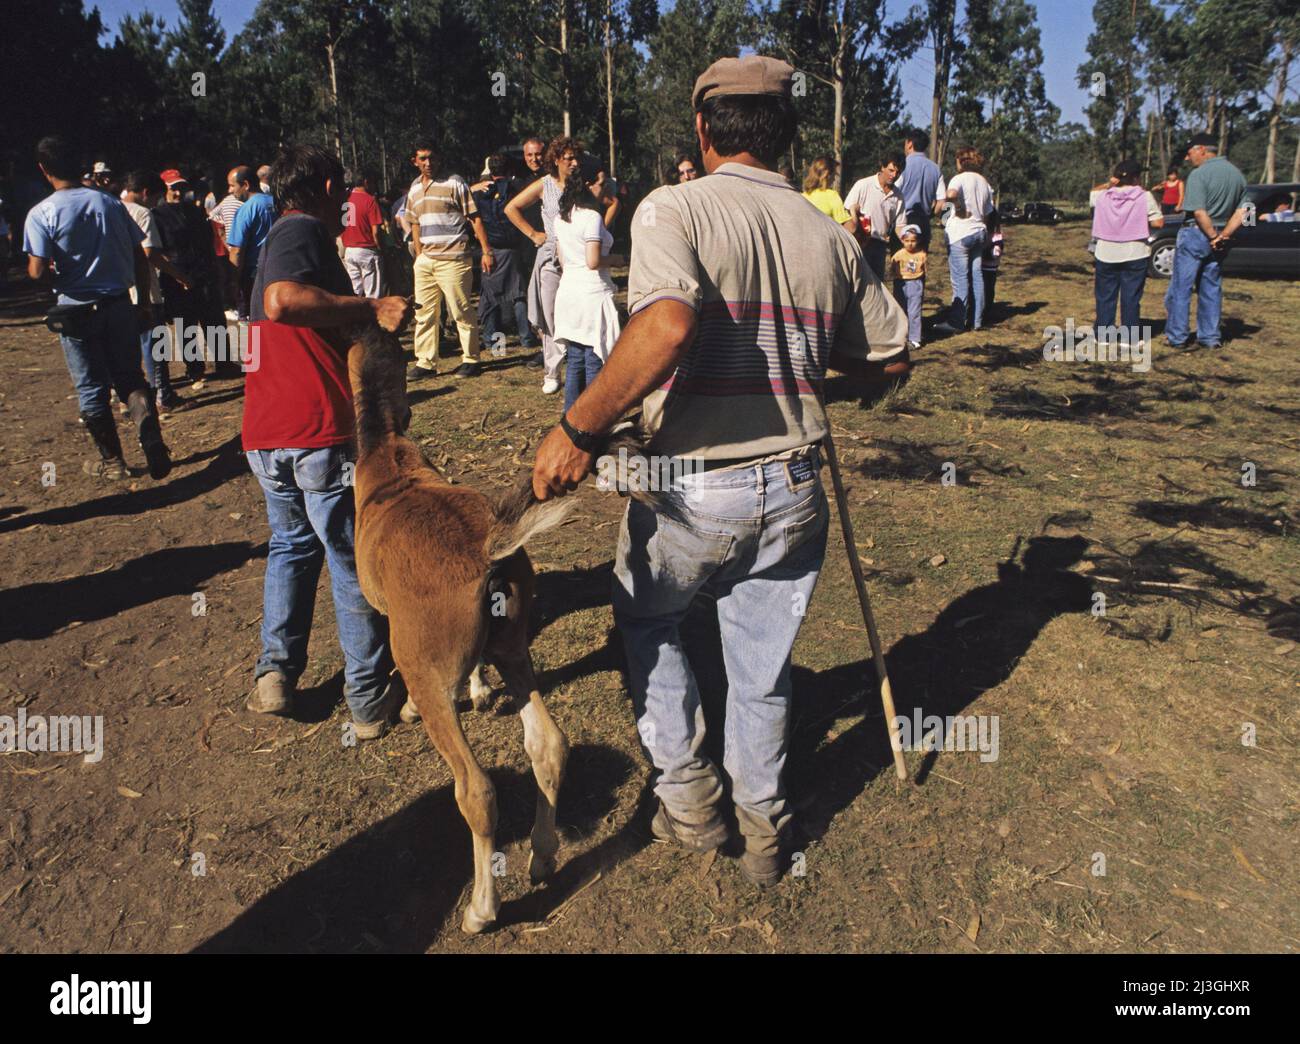 holding a young horse captured during the Rapa das bestas ( Shearing of the Beasts) in San Cibrao, Gondomar, Galicia, Spain Stock Photo